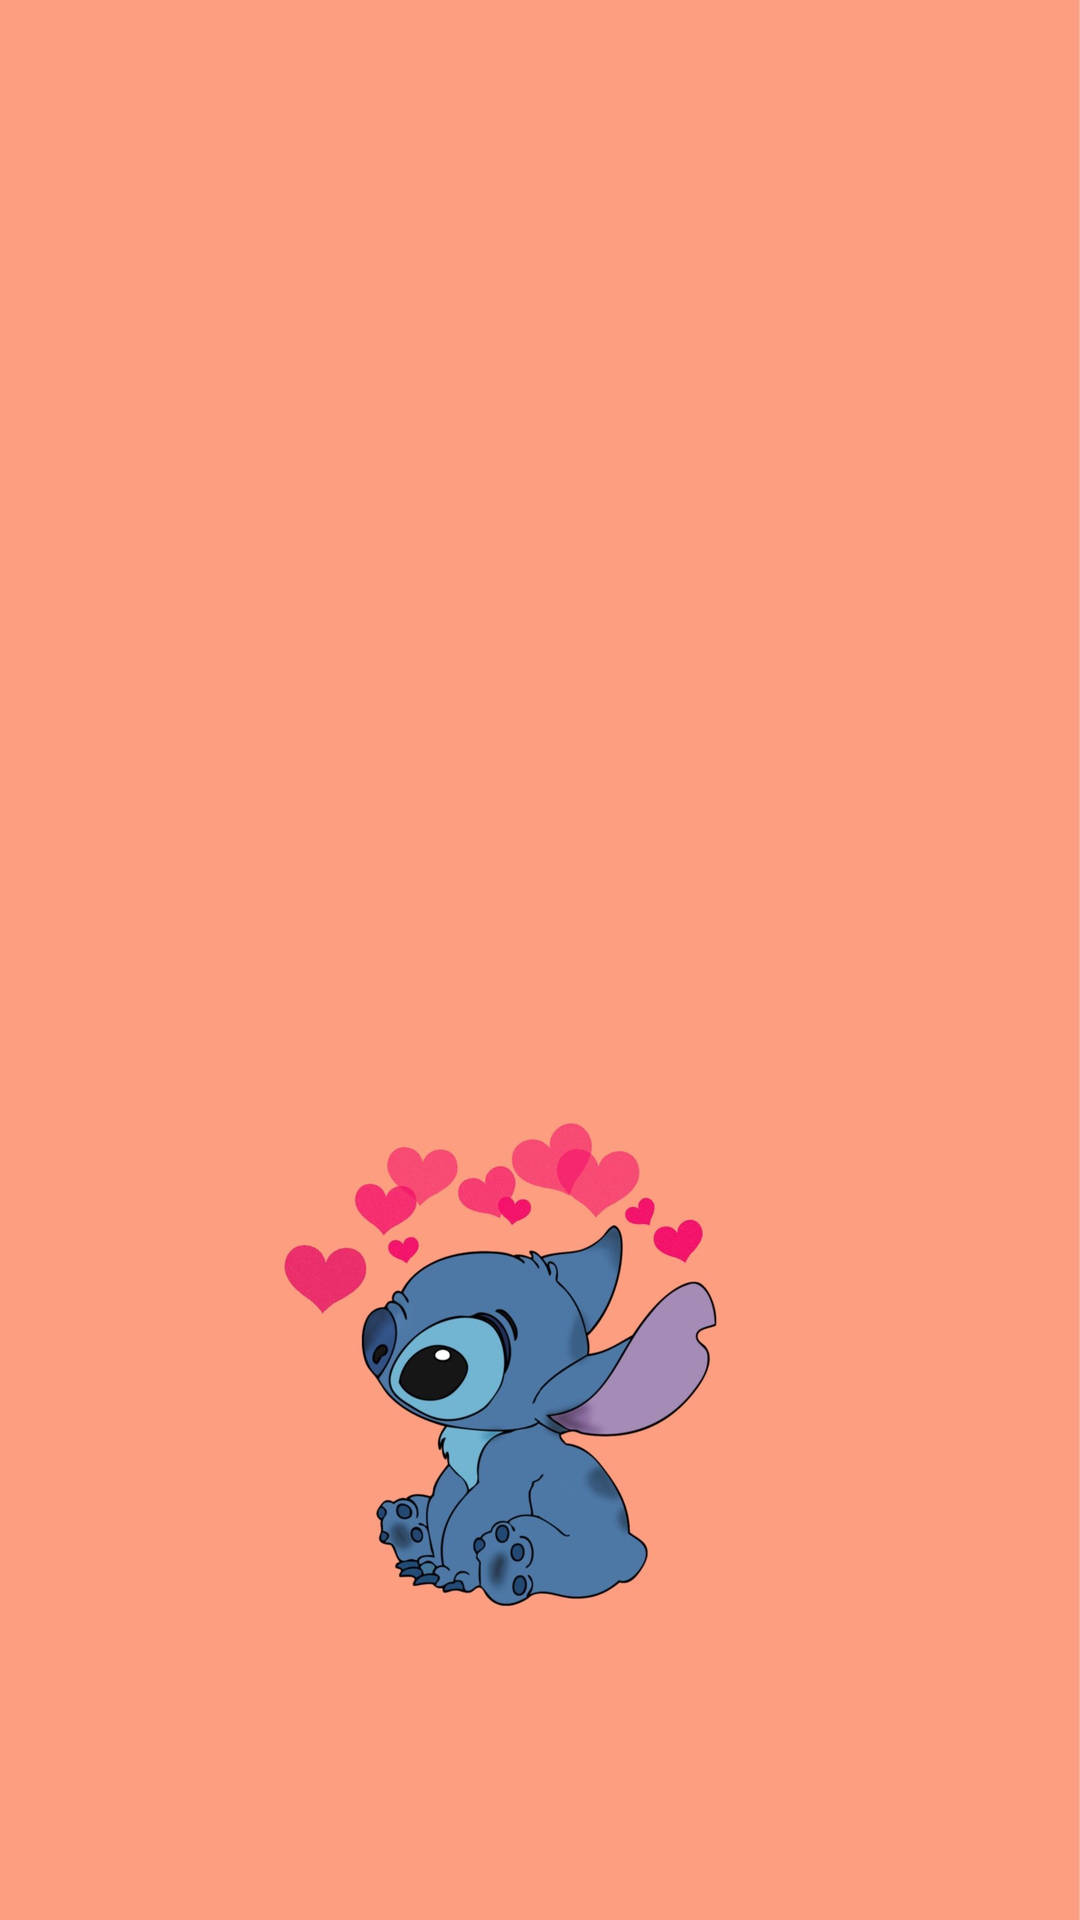 Download Cute Aesthetic Stitch Pink Heart Emojis Wallpaper ...